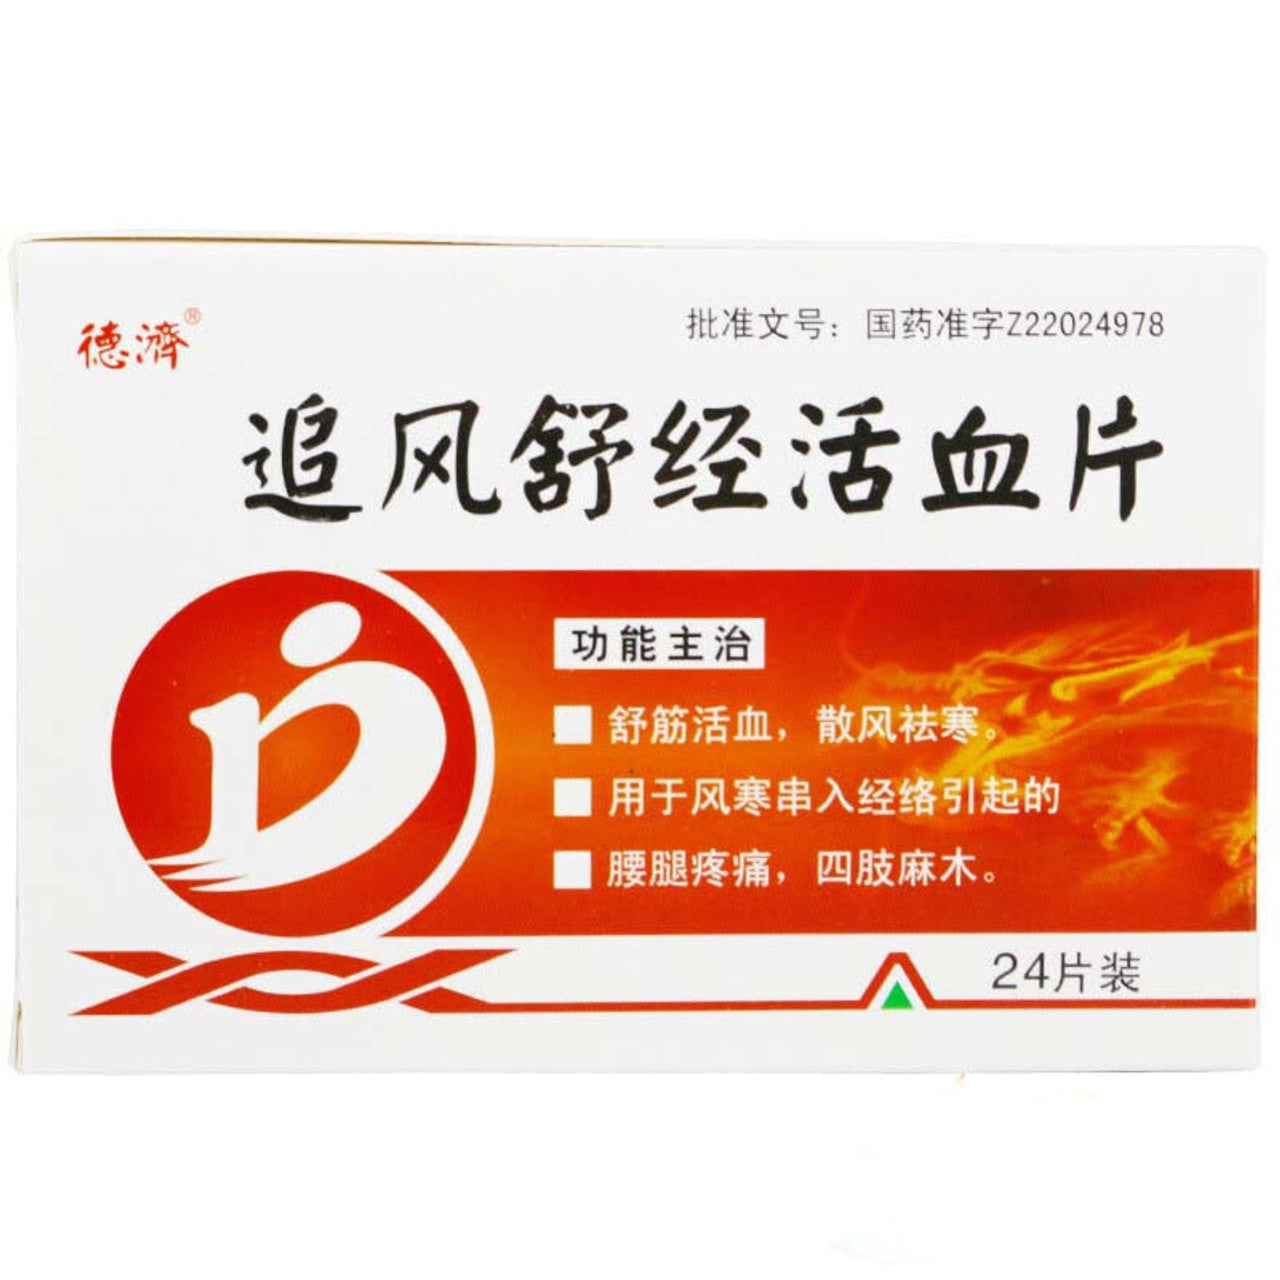 China Herbs. Brand Deji.  Zhuifeng Shujing Huoxue Pian or  Zhuifeng Shujing Huoxue Tablets or Zhui Feng Shu Jing Huo Xue Pian or ZhuiFengShuJingHuoXuePian for waist and leg pain and numbness of limbs caused by wind cold entering the meridian.